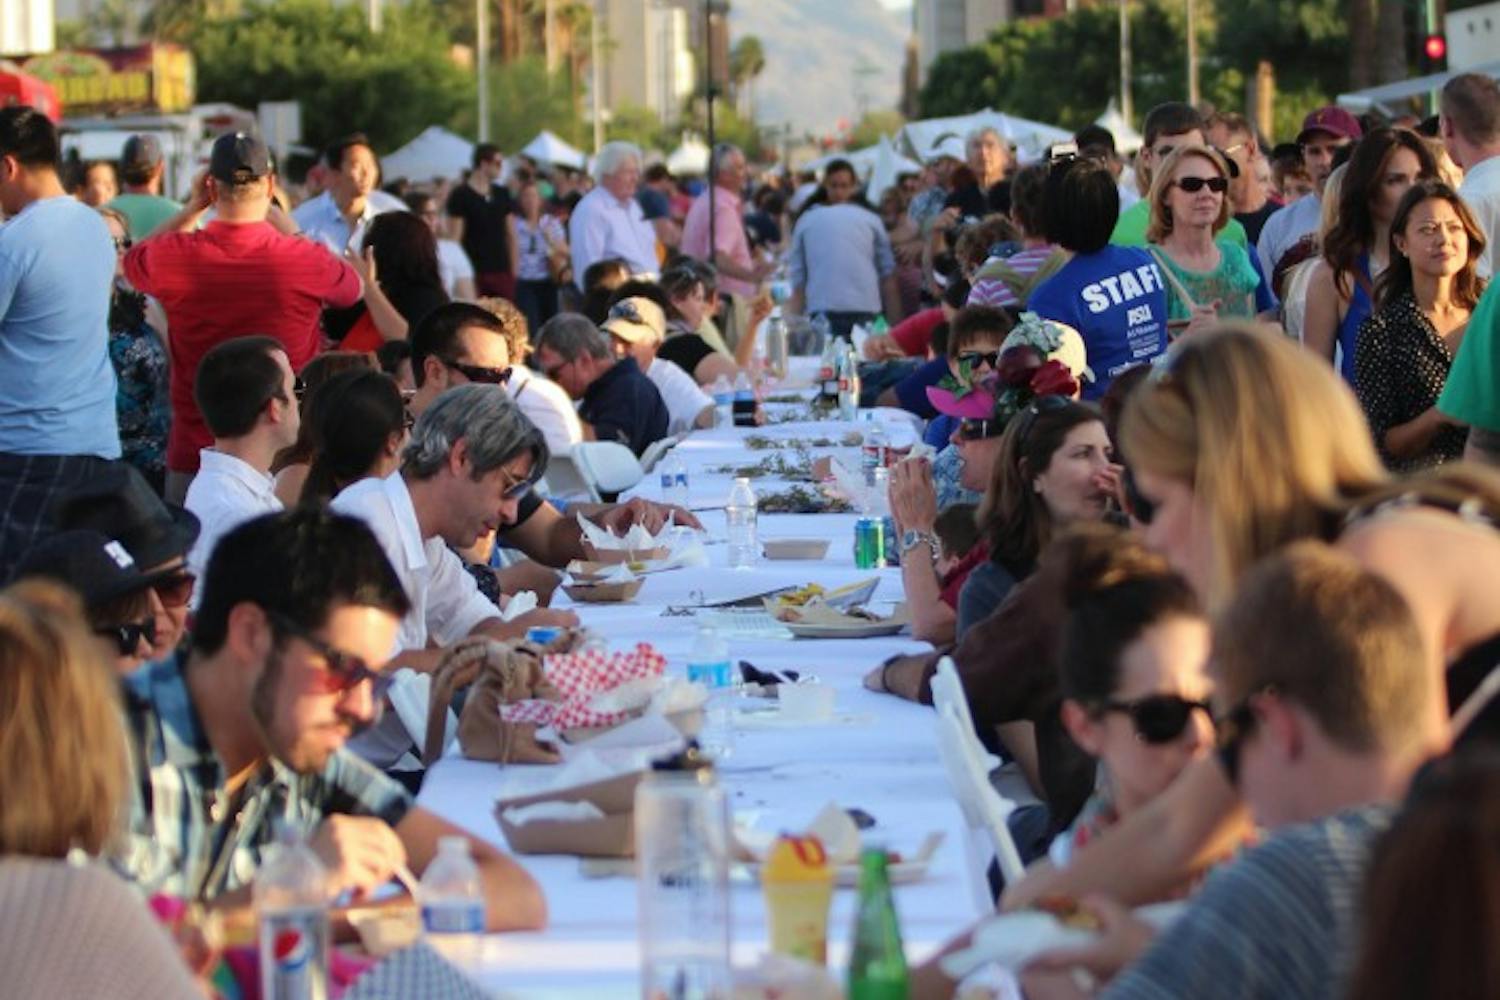 Phoenicians sit down to eat at Feast on the Street. Downtown Phoenix's feast on the street featured a mile and a half long table that stretched from Margaret T. Hance Park to ASU's downtown phoenix campus. (Photo by Dominic Valente)